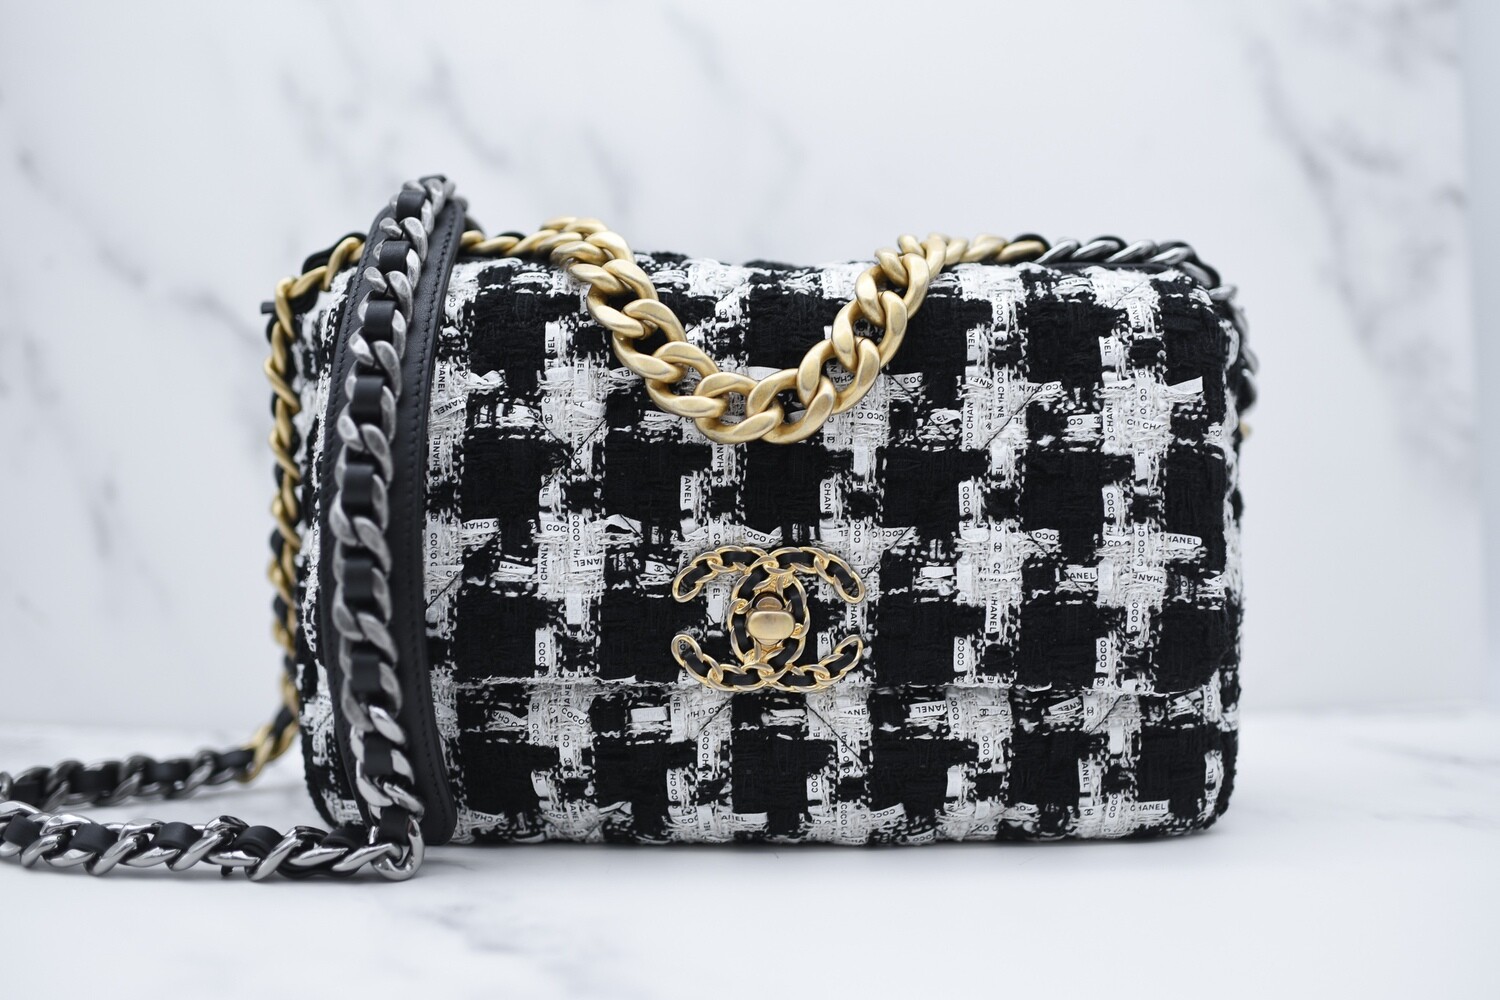 Chanel 19 Small, Black and White Tweed with Mixed Tone Hardware, Preowned  in Dustbag WA001 - Julia Rose Boston